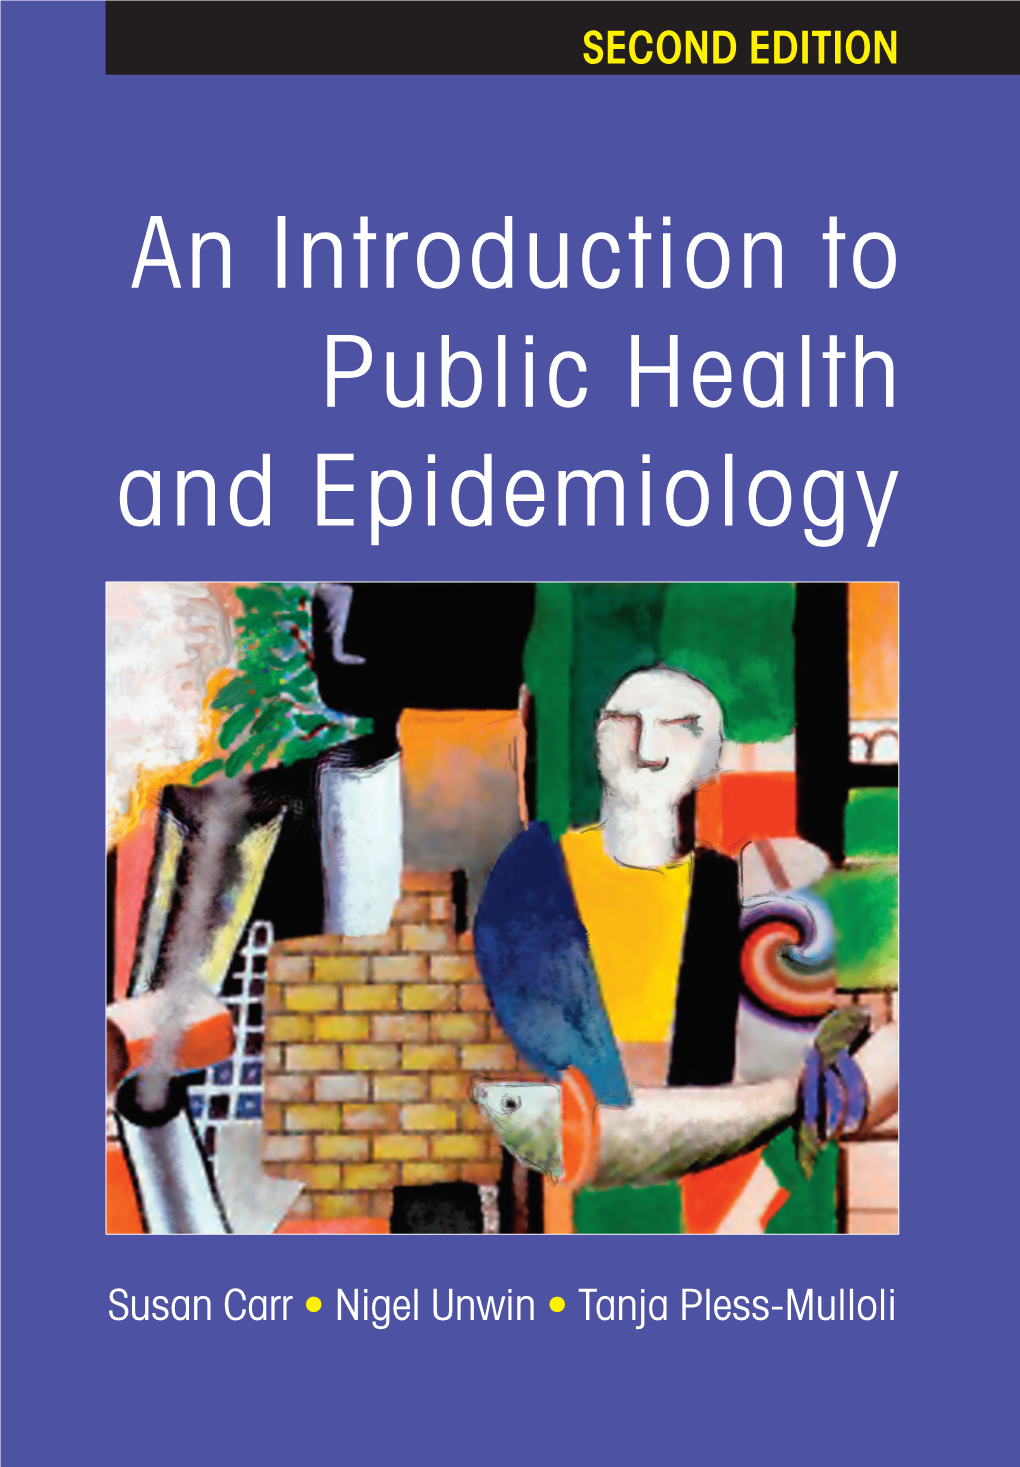 An Introduction to Public Health and Epidemiology an Introduction to Public Health and Epidemiology SECOND EDITION